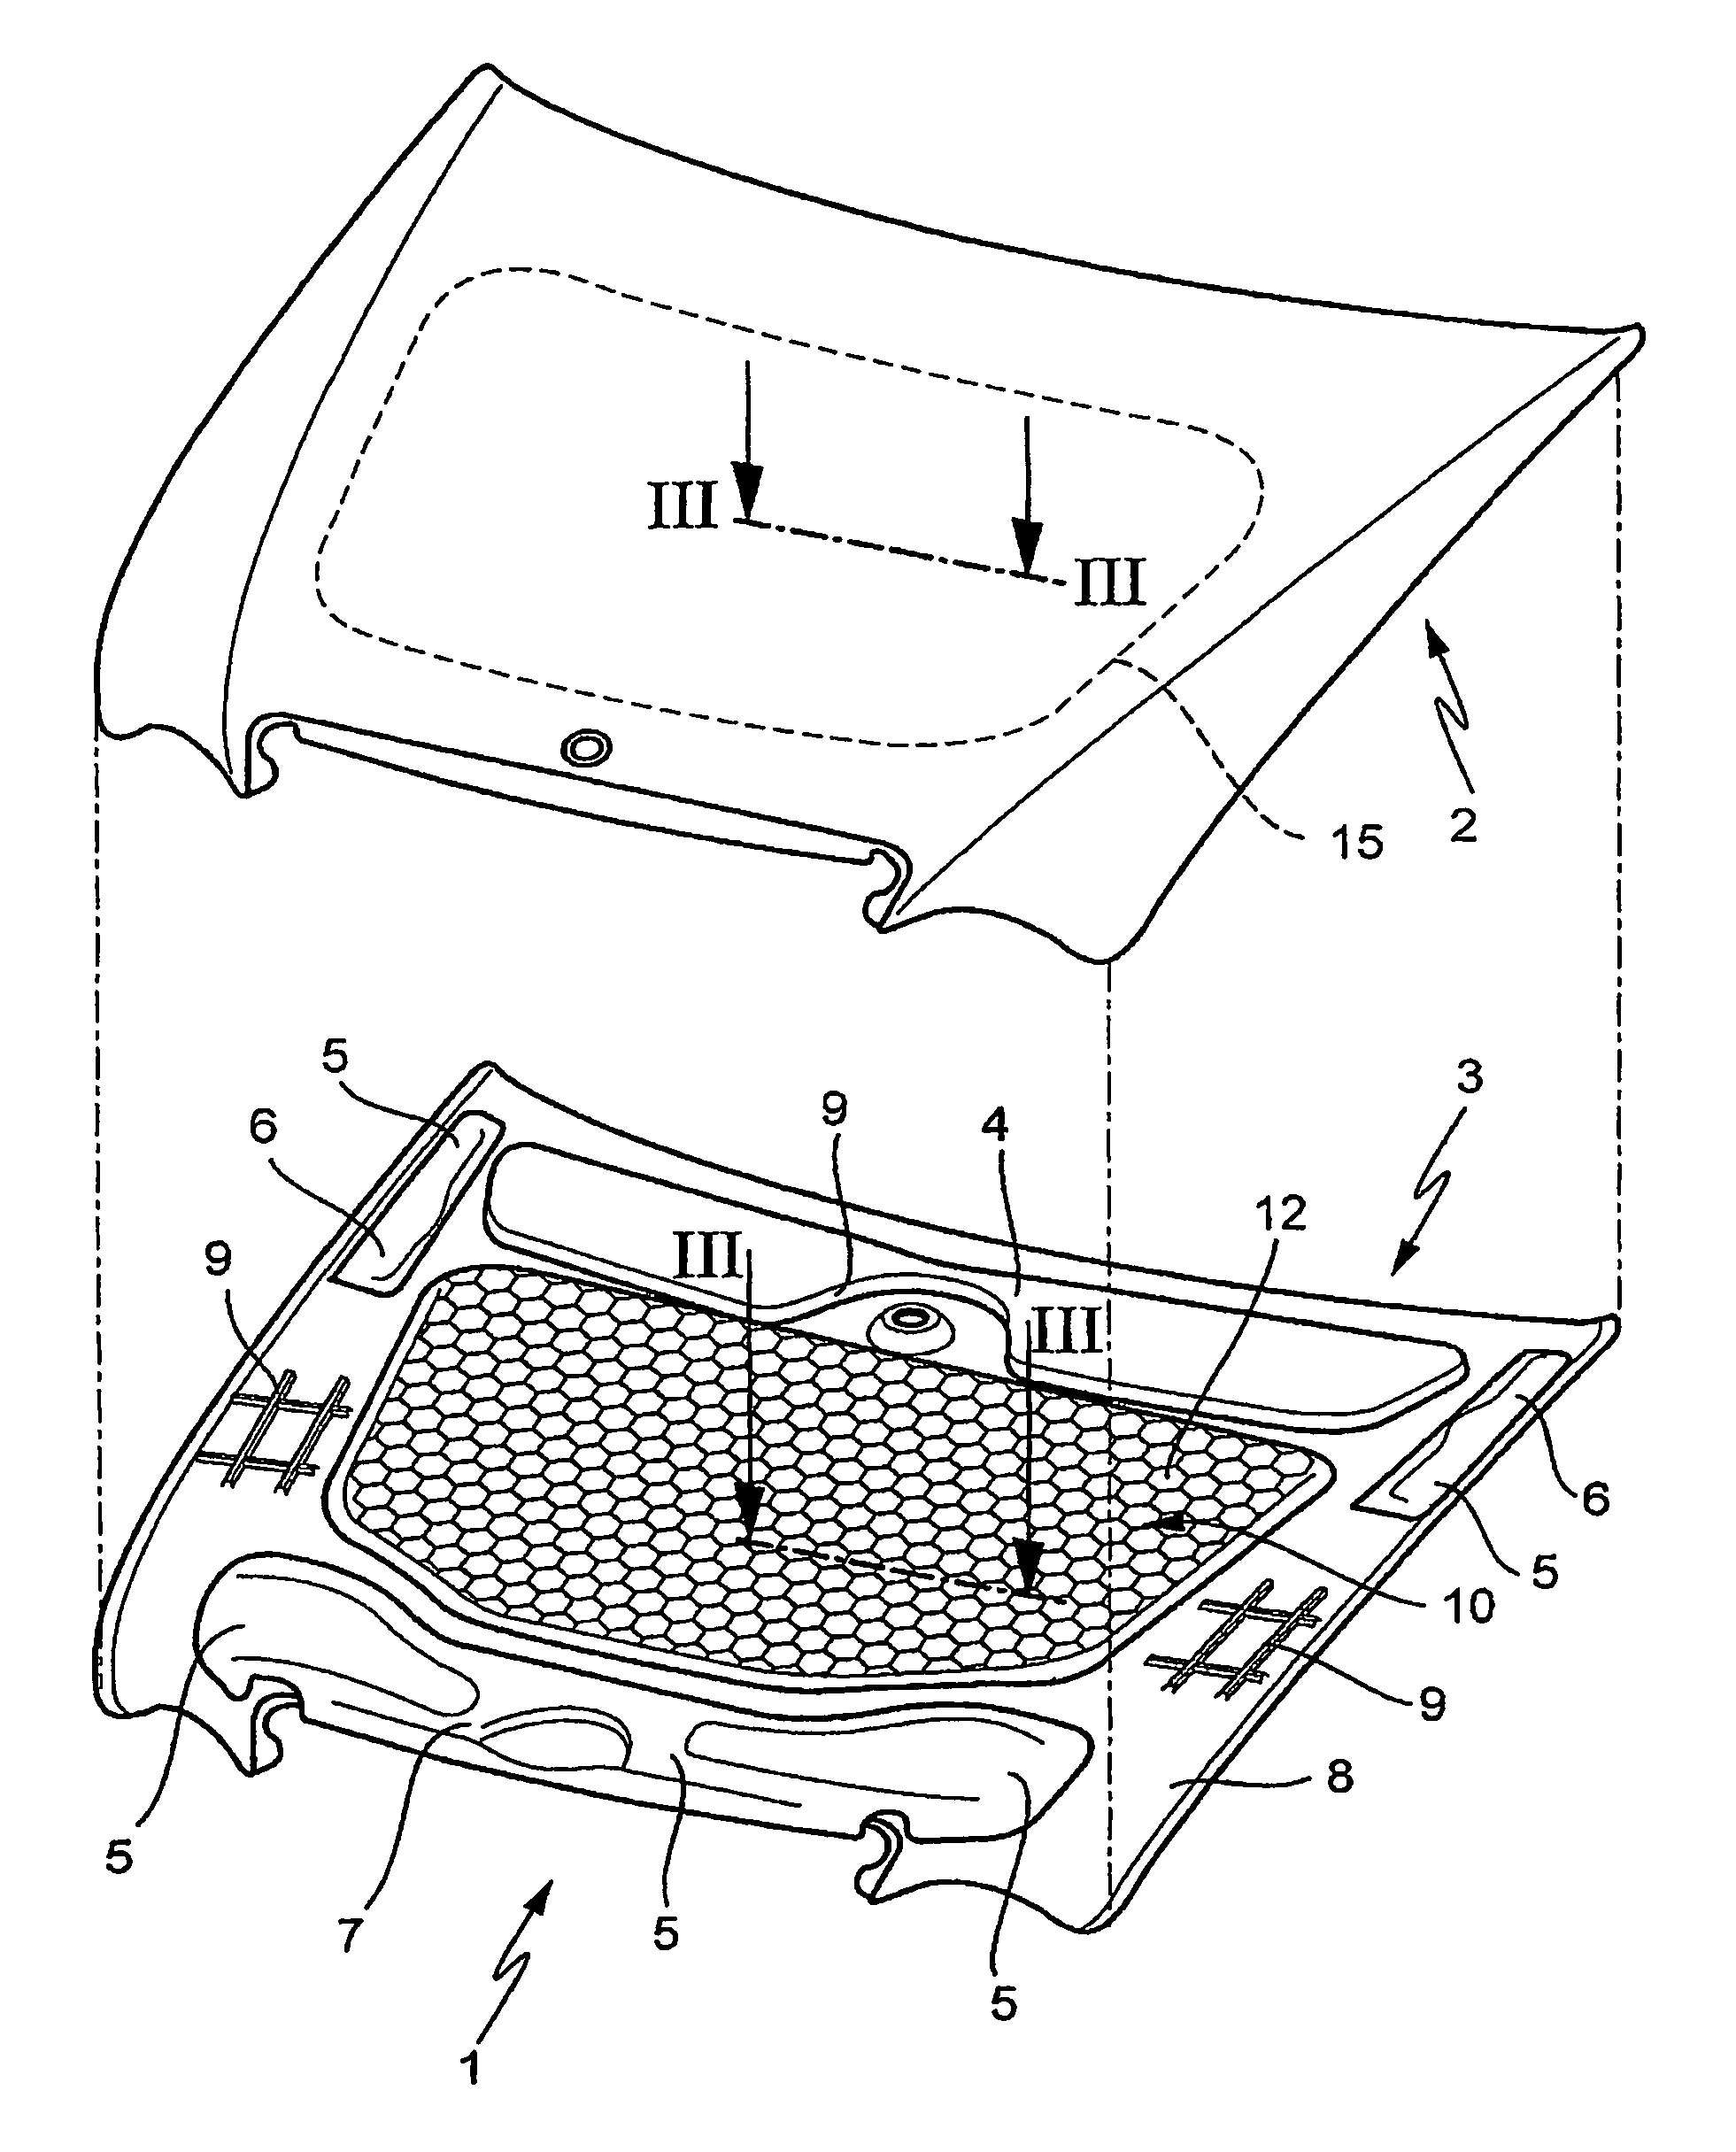 Engine hood comprising a protective device for pedestrians